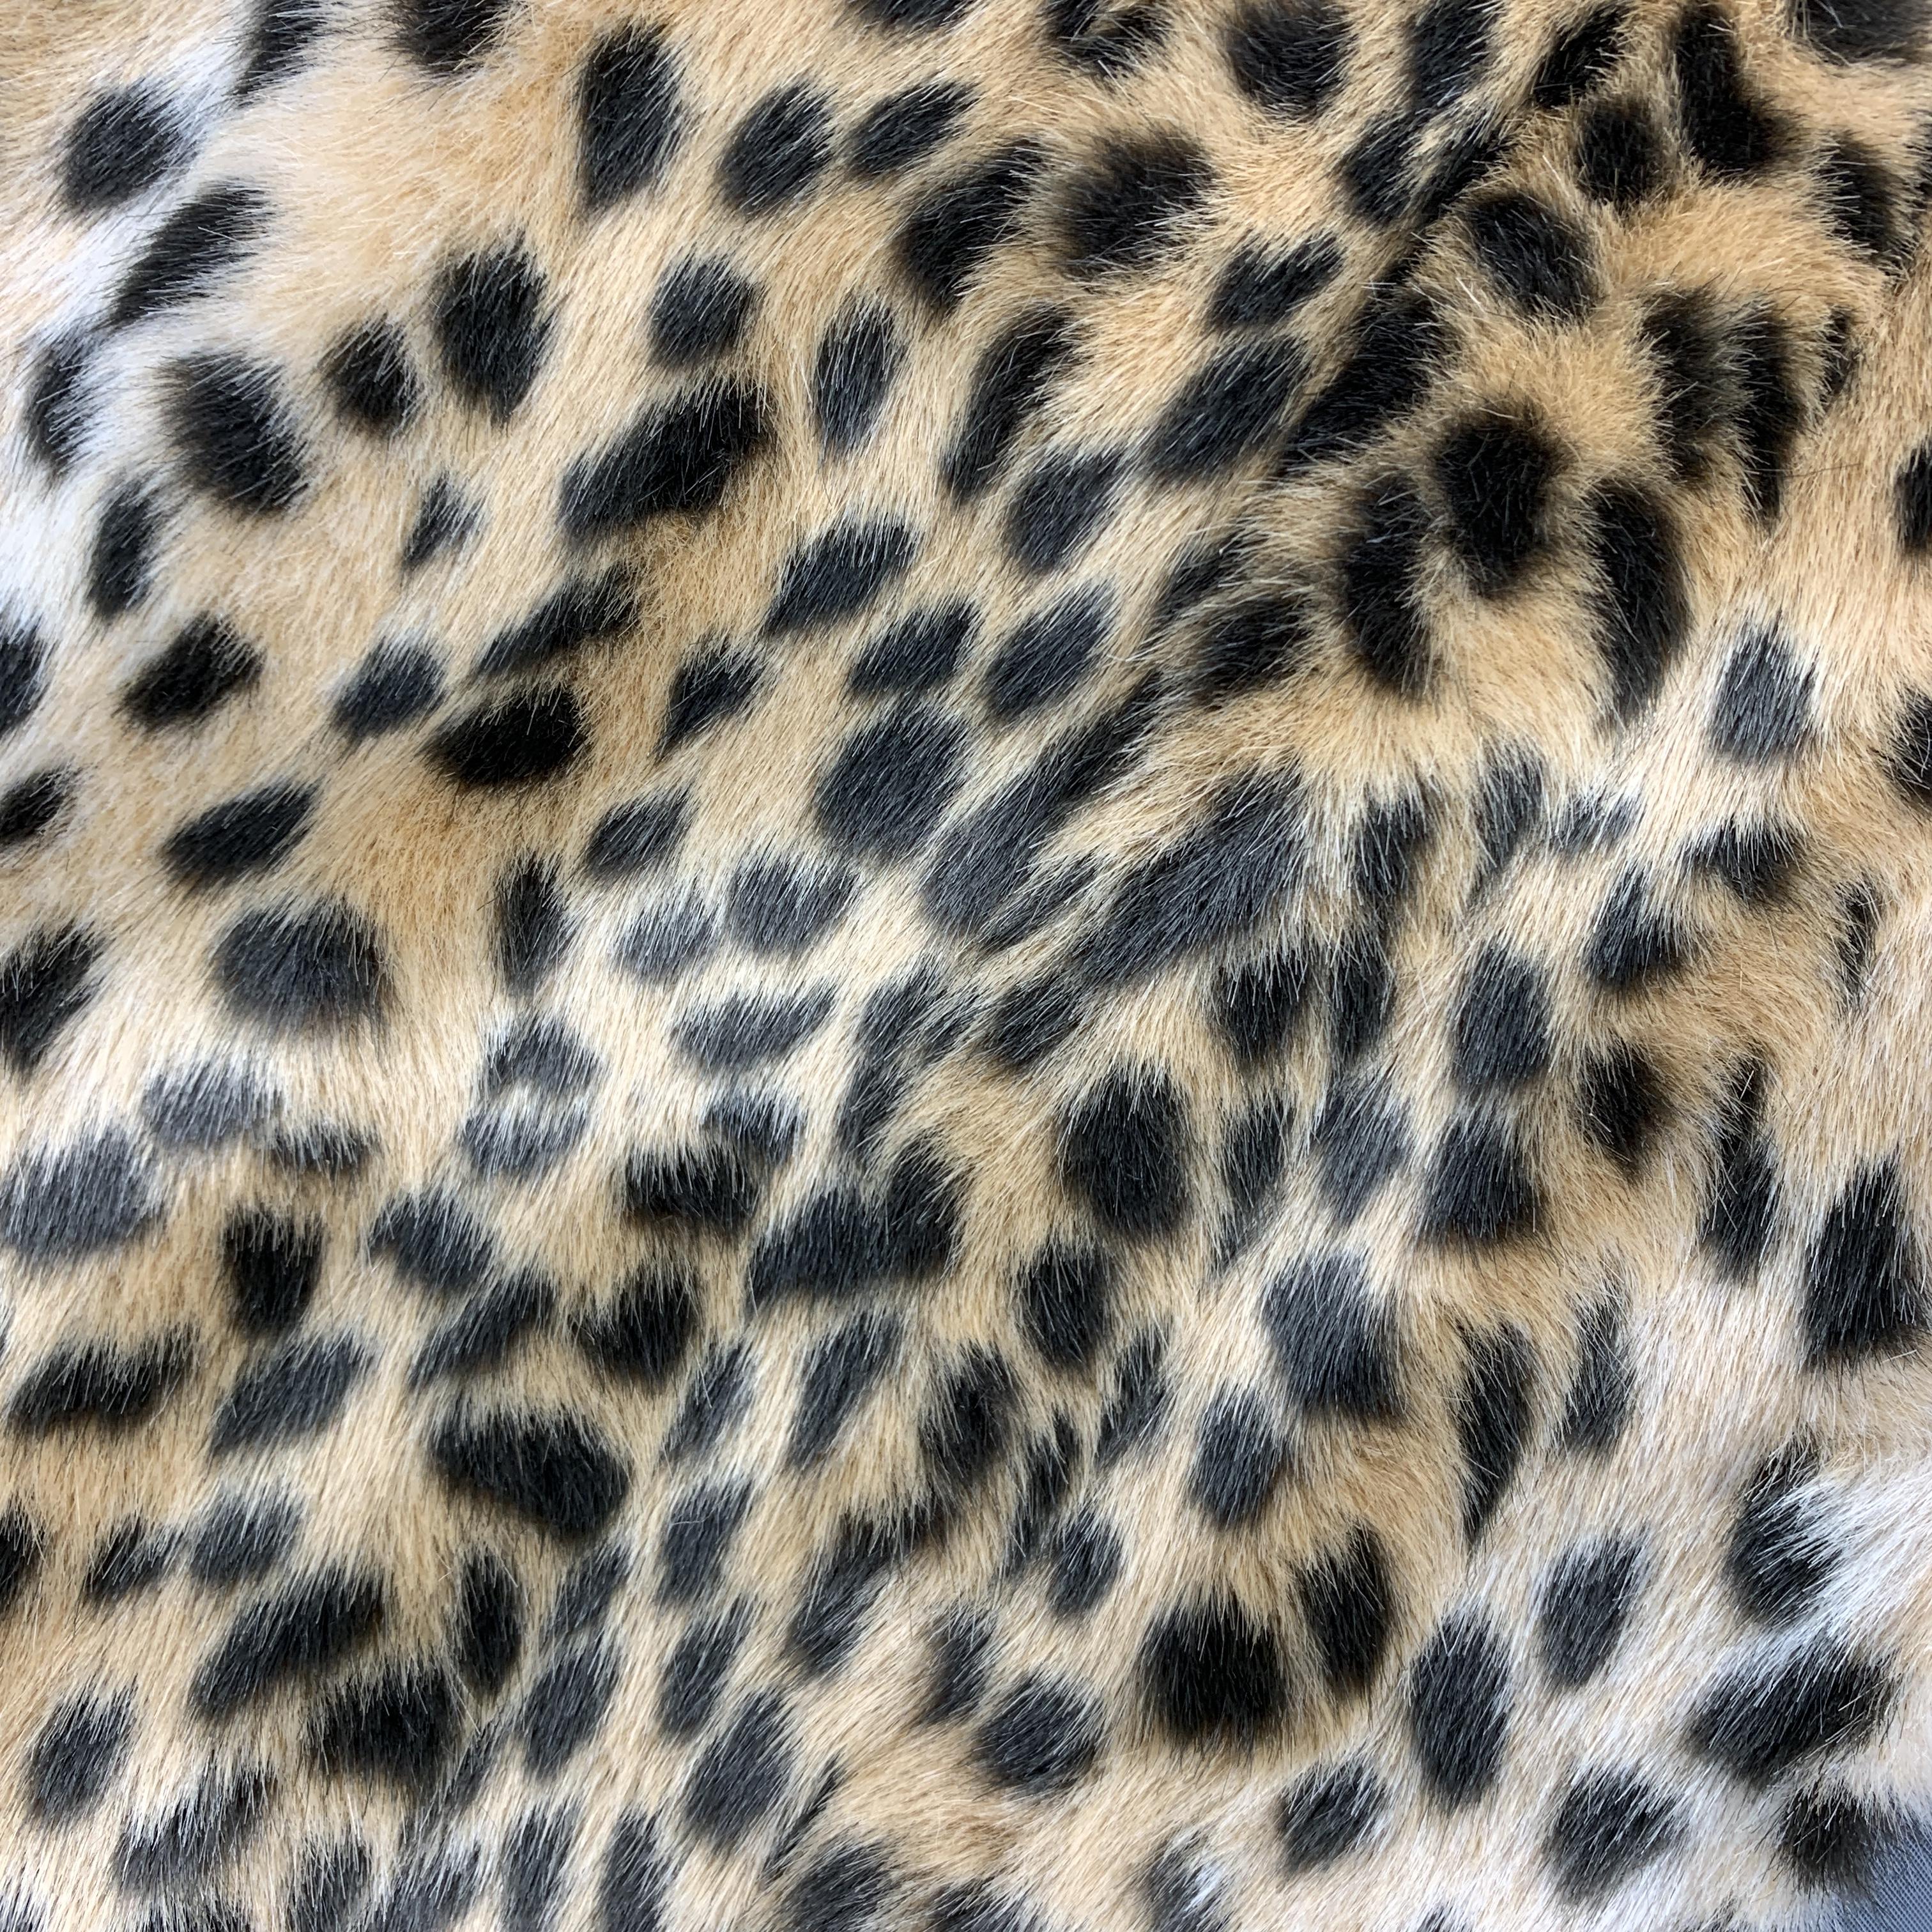 DRIES VAN NOTEN scarf comes in beige and black faux cheetah fur with black liner and loop closure. Missing strap. As-is. Made in Hungary.
 
Excellent Pre-Owned Condition.
 
Length: 54 in.
Width: 9-11 in.